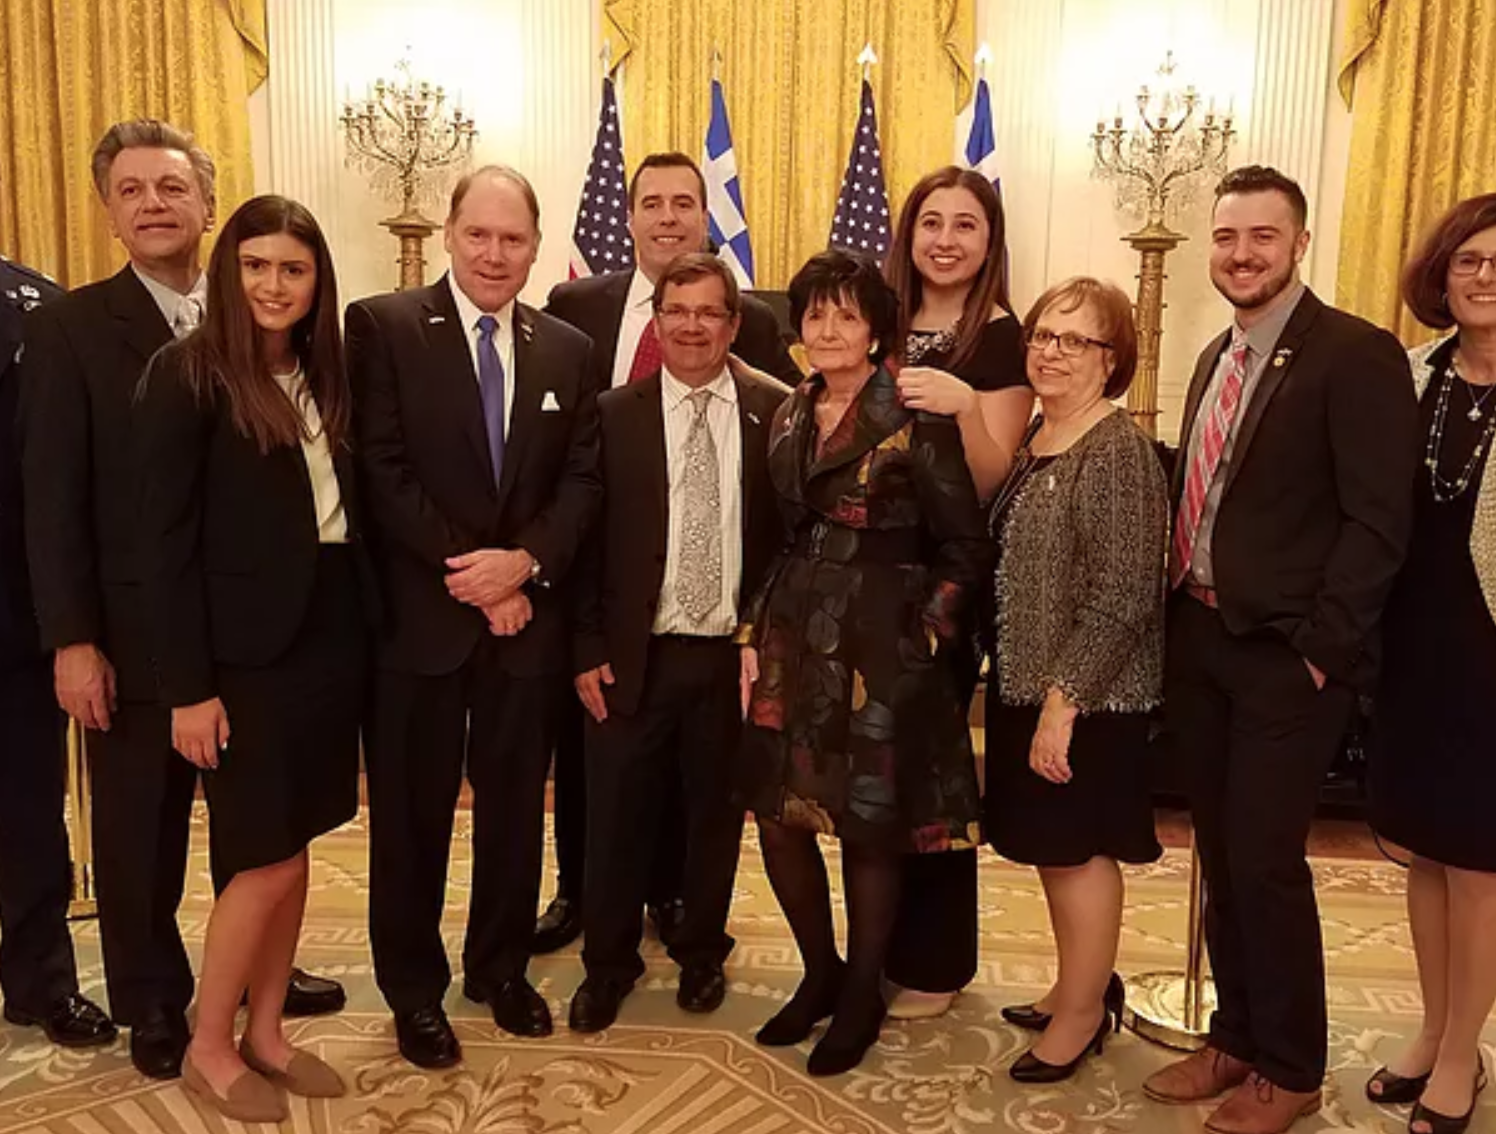 AHEPA Family Celebrates Greek Independence Day at the White House